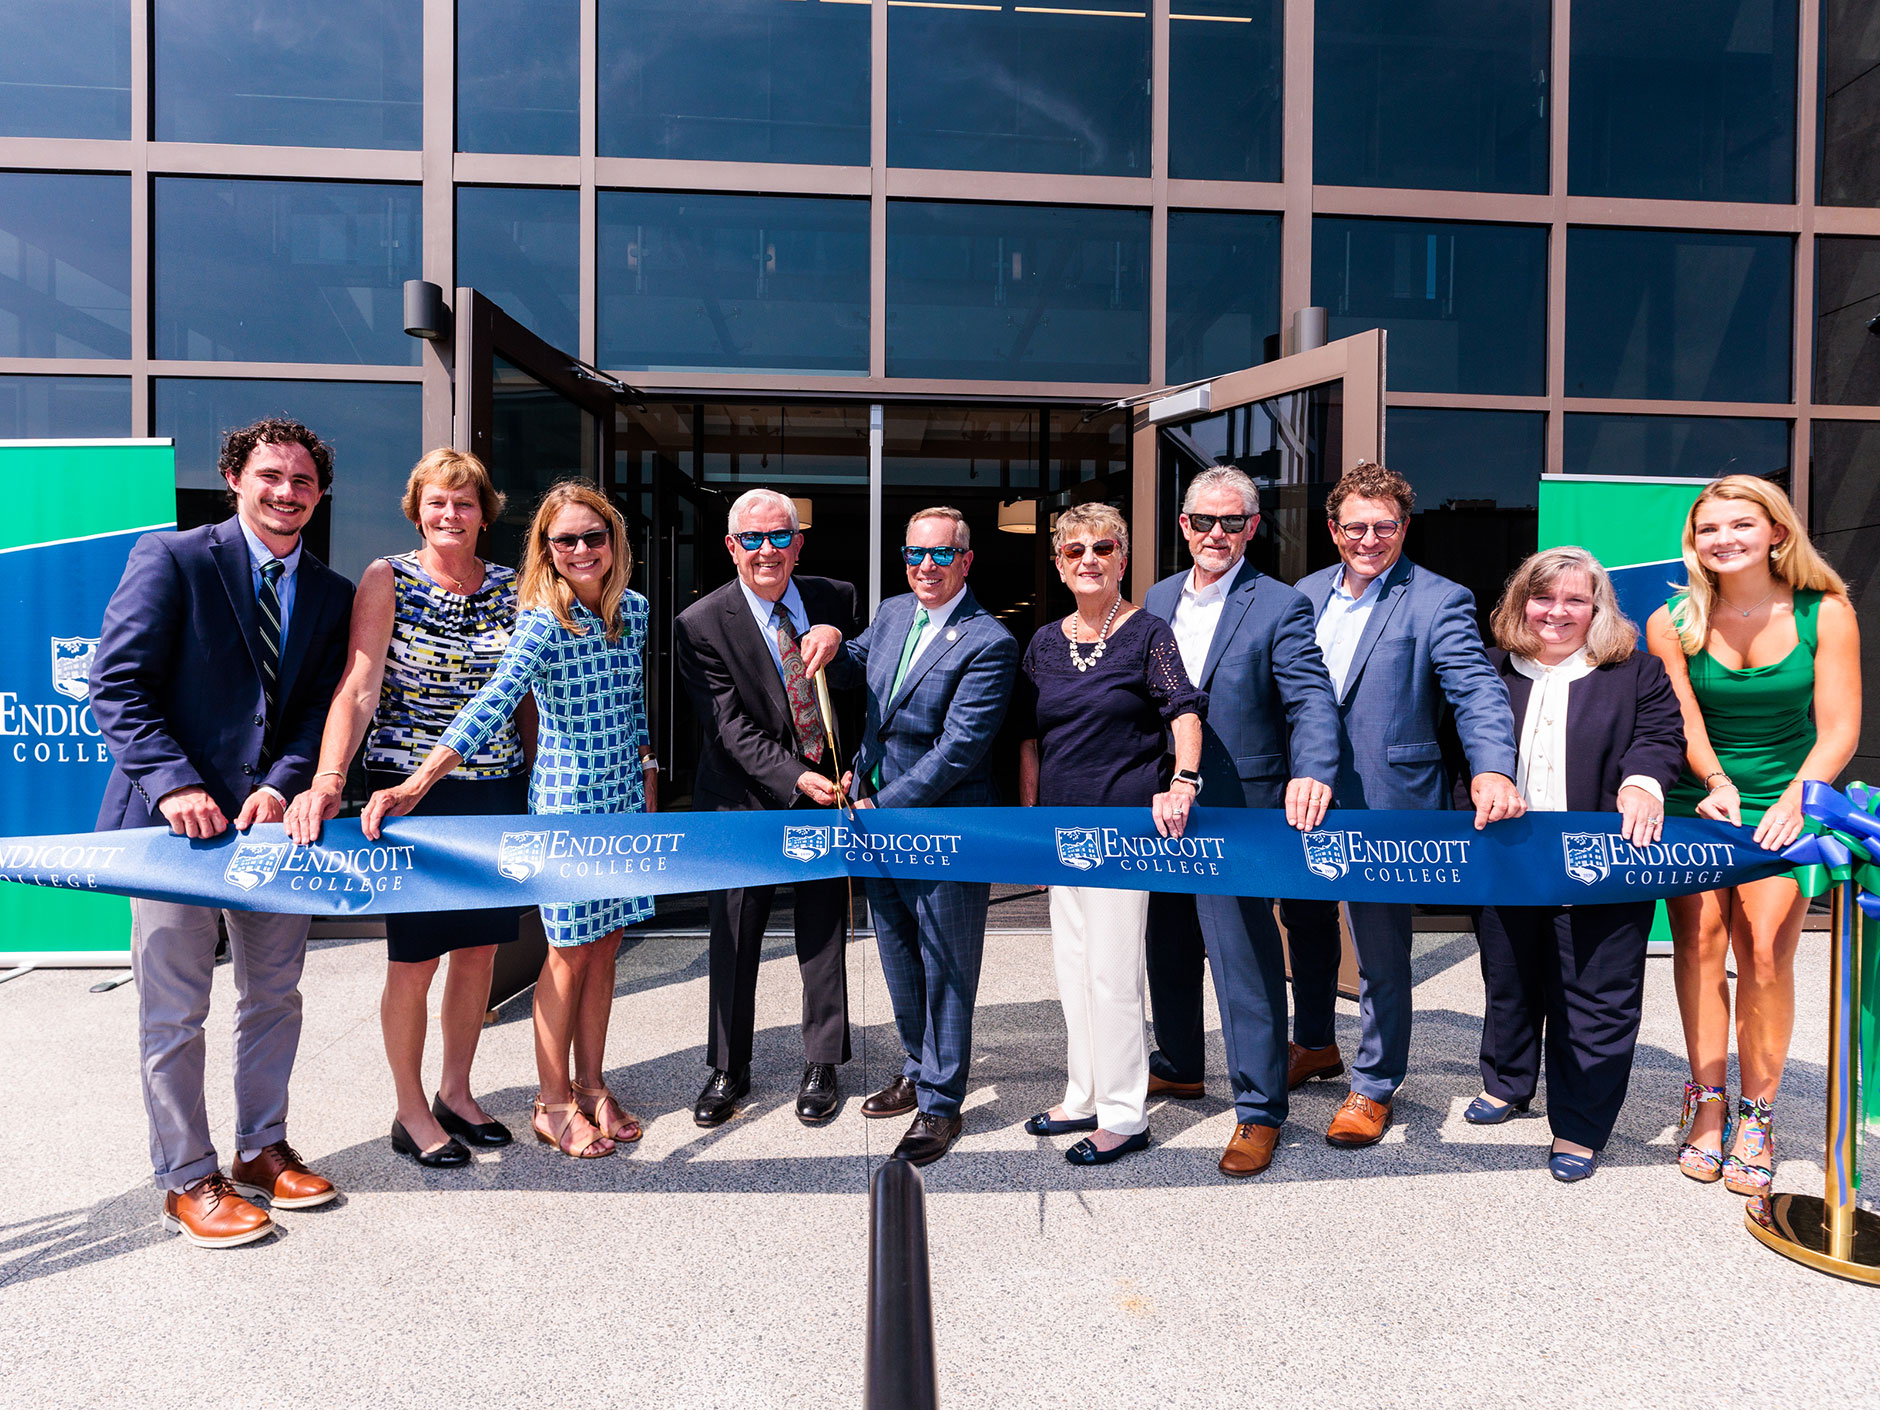 In a ribbon-cutting ceremony that drew community members far and wide, Endicott College celebrated the opening of the new Cummings School of Nursing & Health Sciences—the result of a historic $20 million partnership with Cummings Foundation.